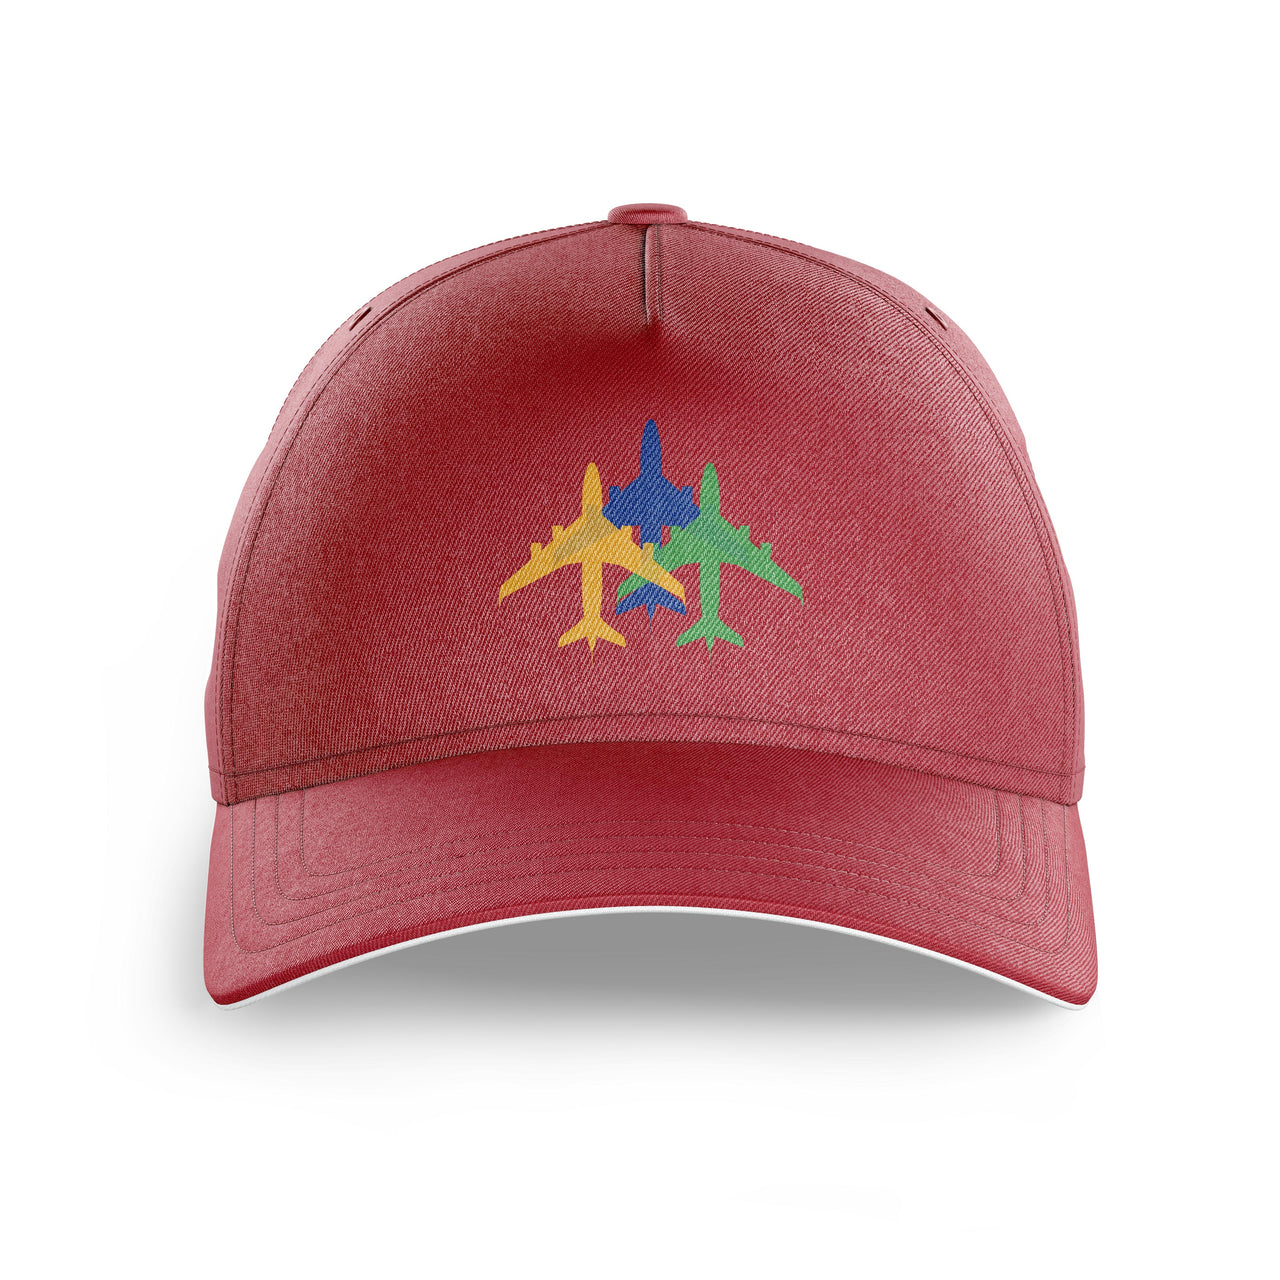 Colourful 3 Airplanes Printed Hats